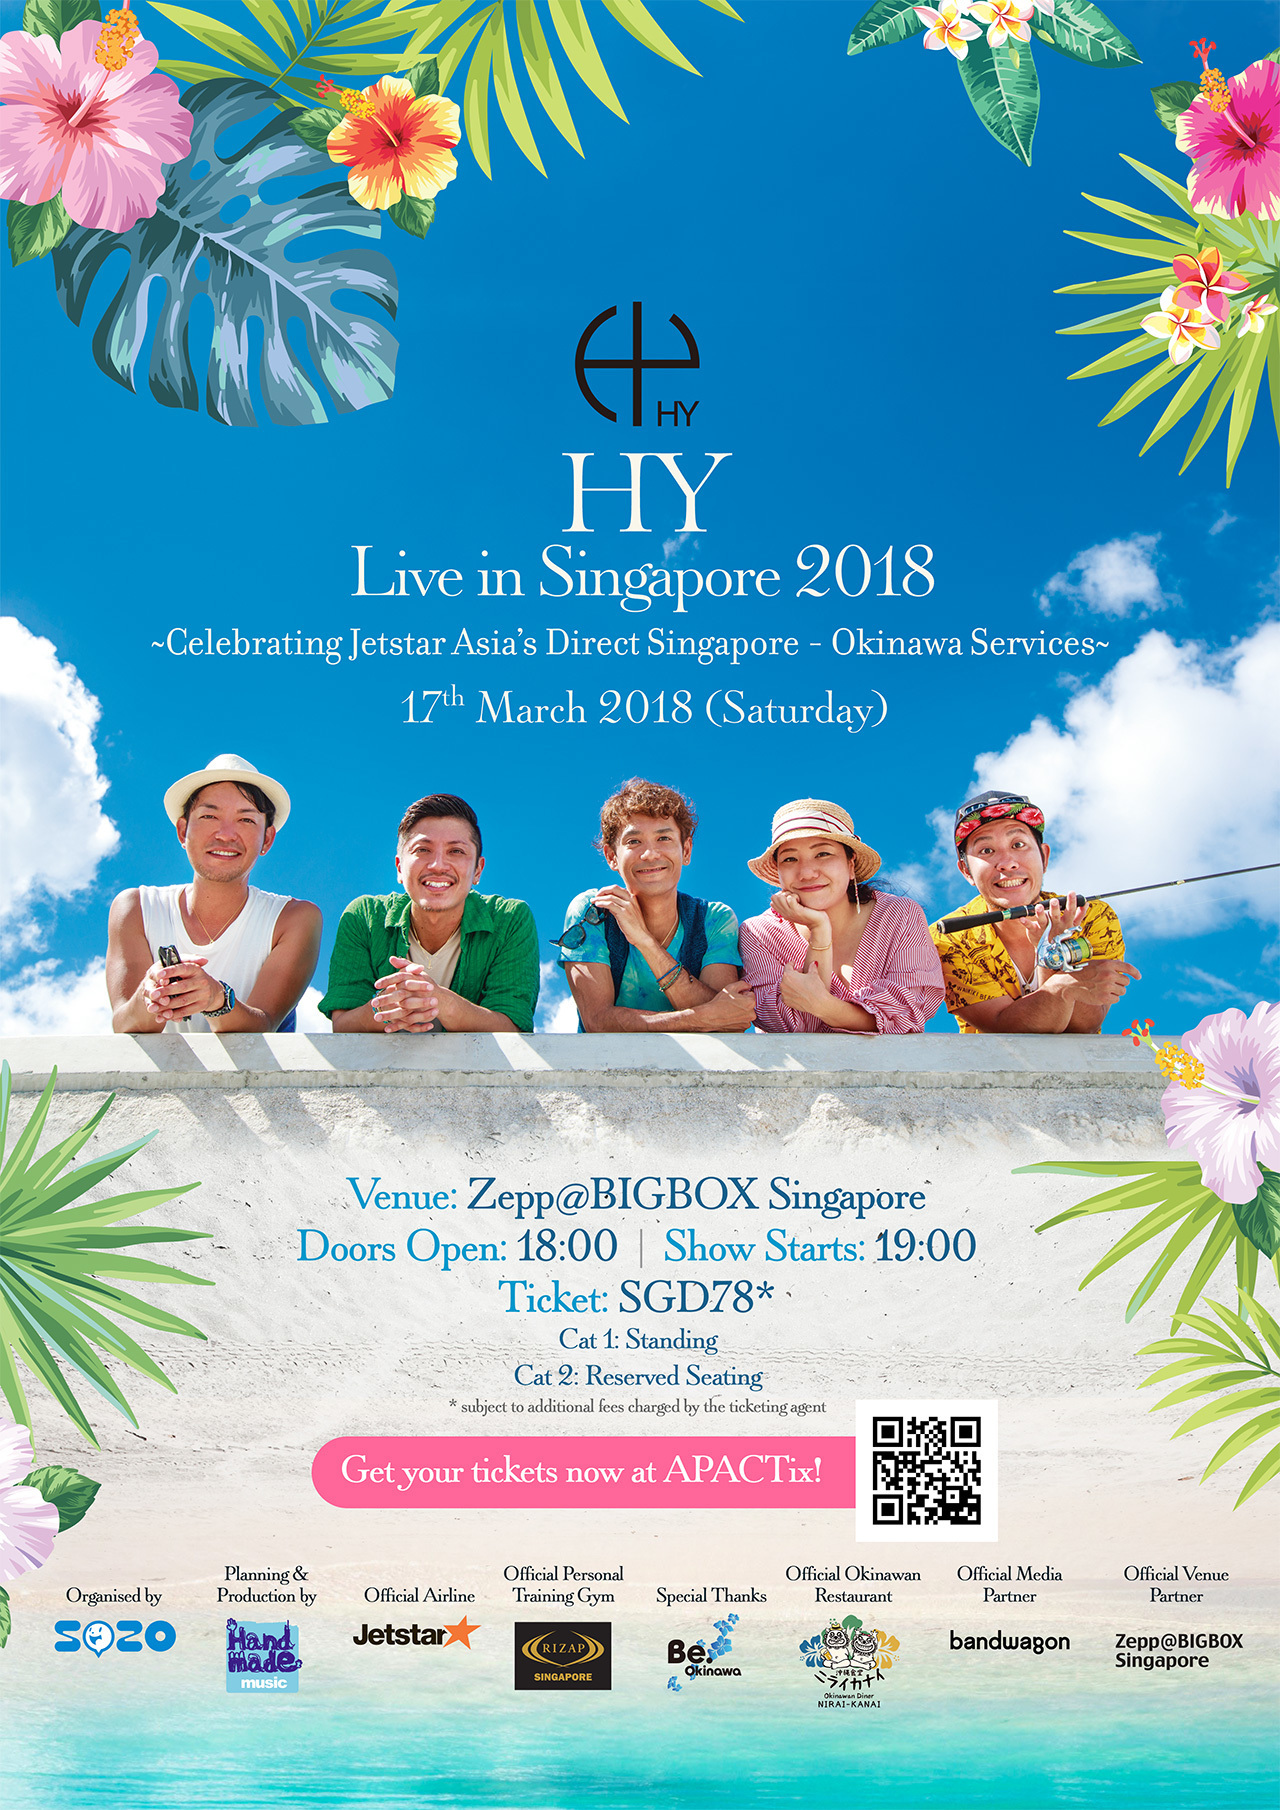 HY Live in Singapore 2018チケット販売中！